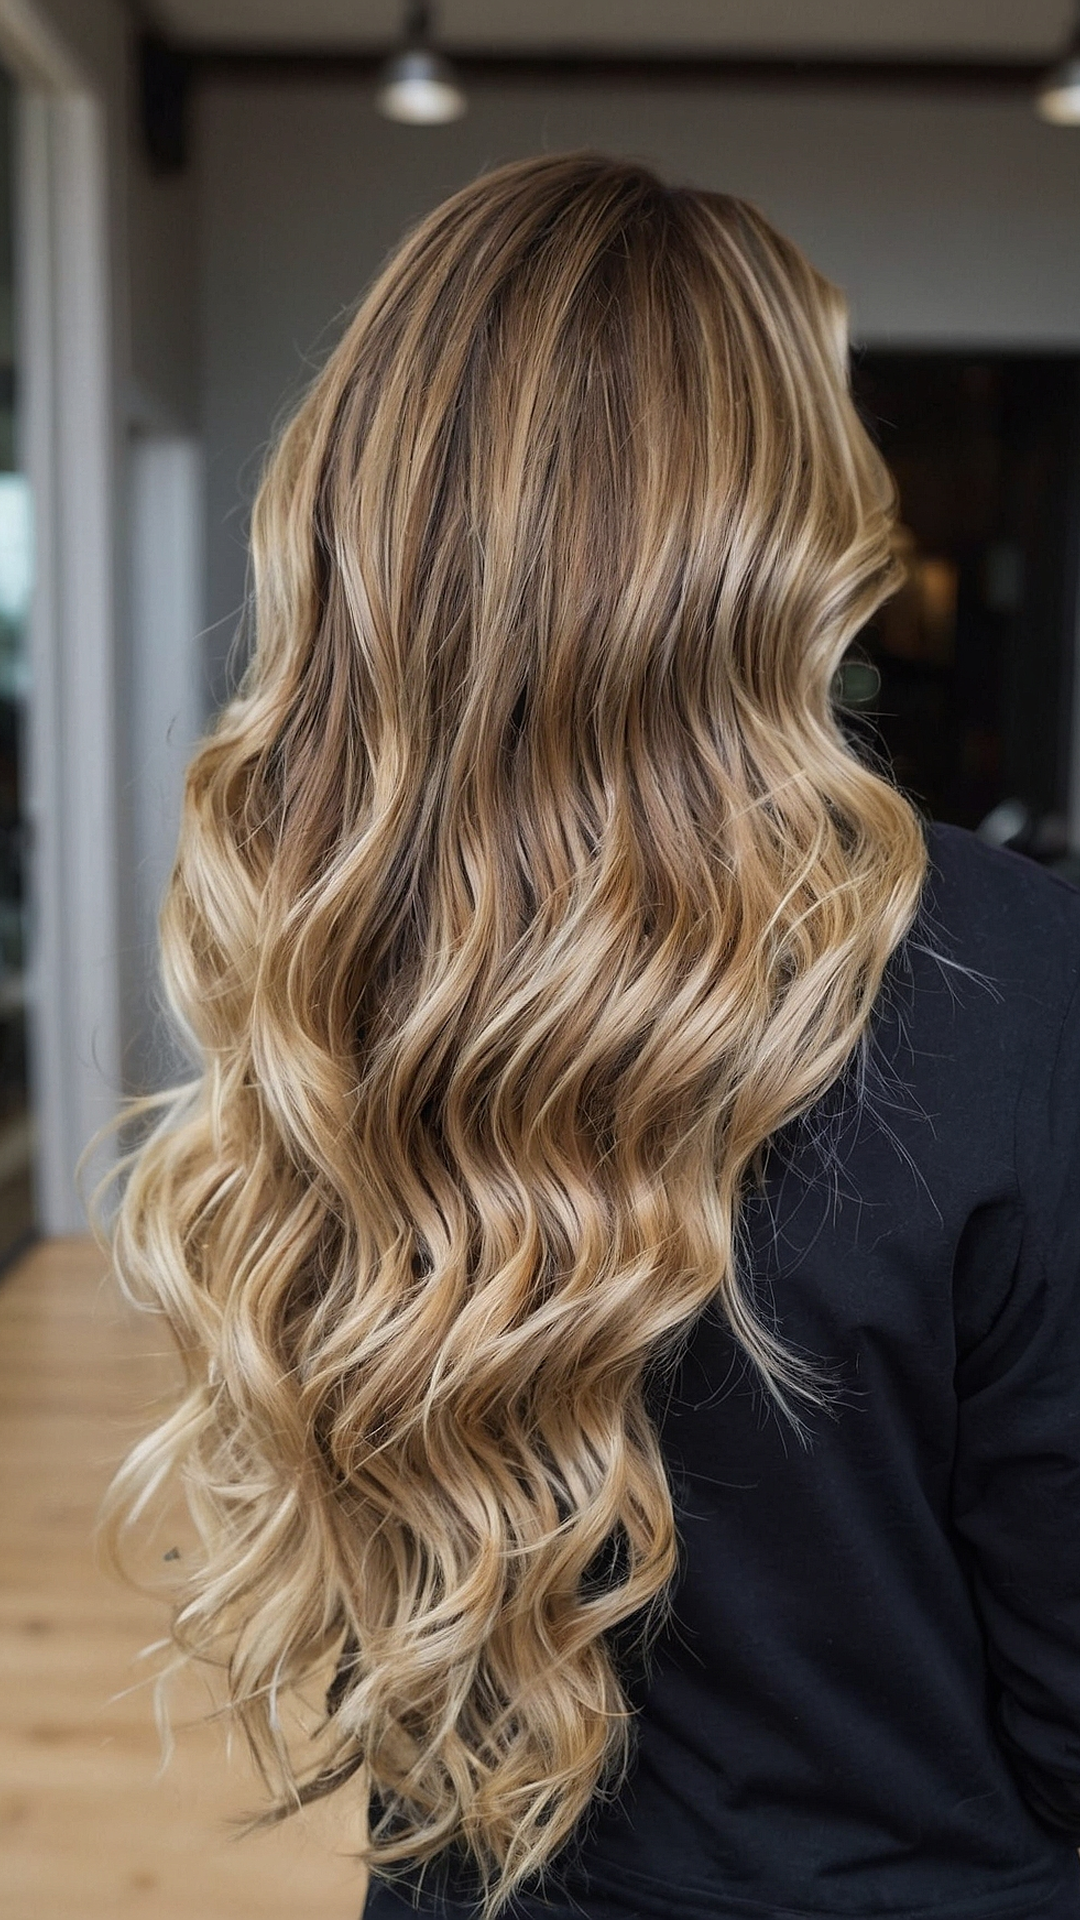 Sultry Waves: Stunning Wavy Hair Ideas